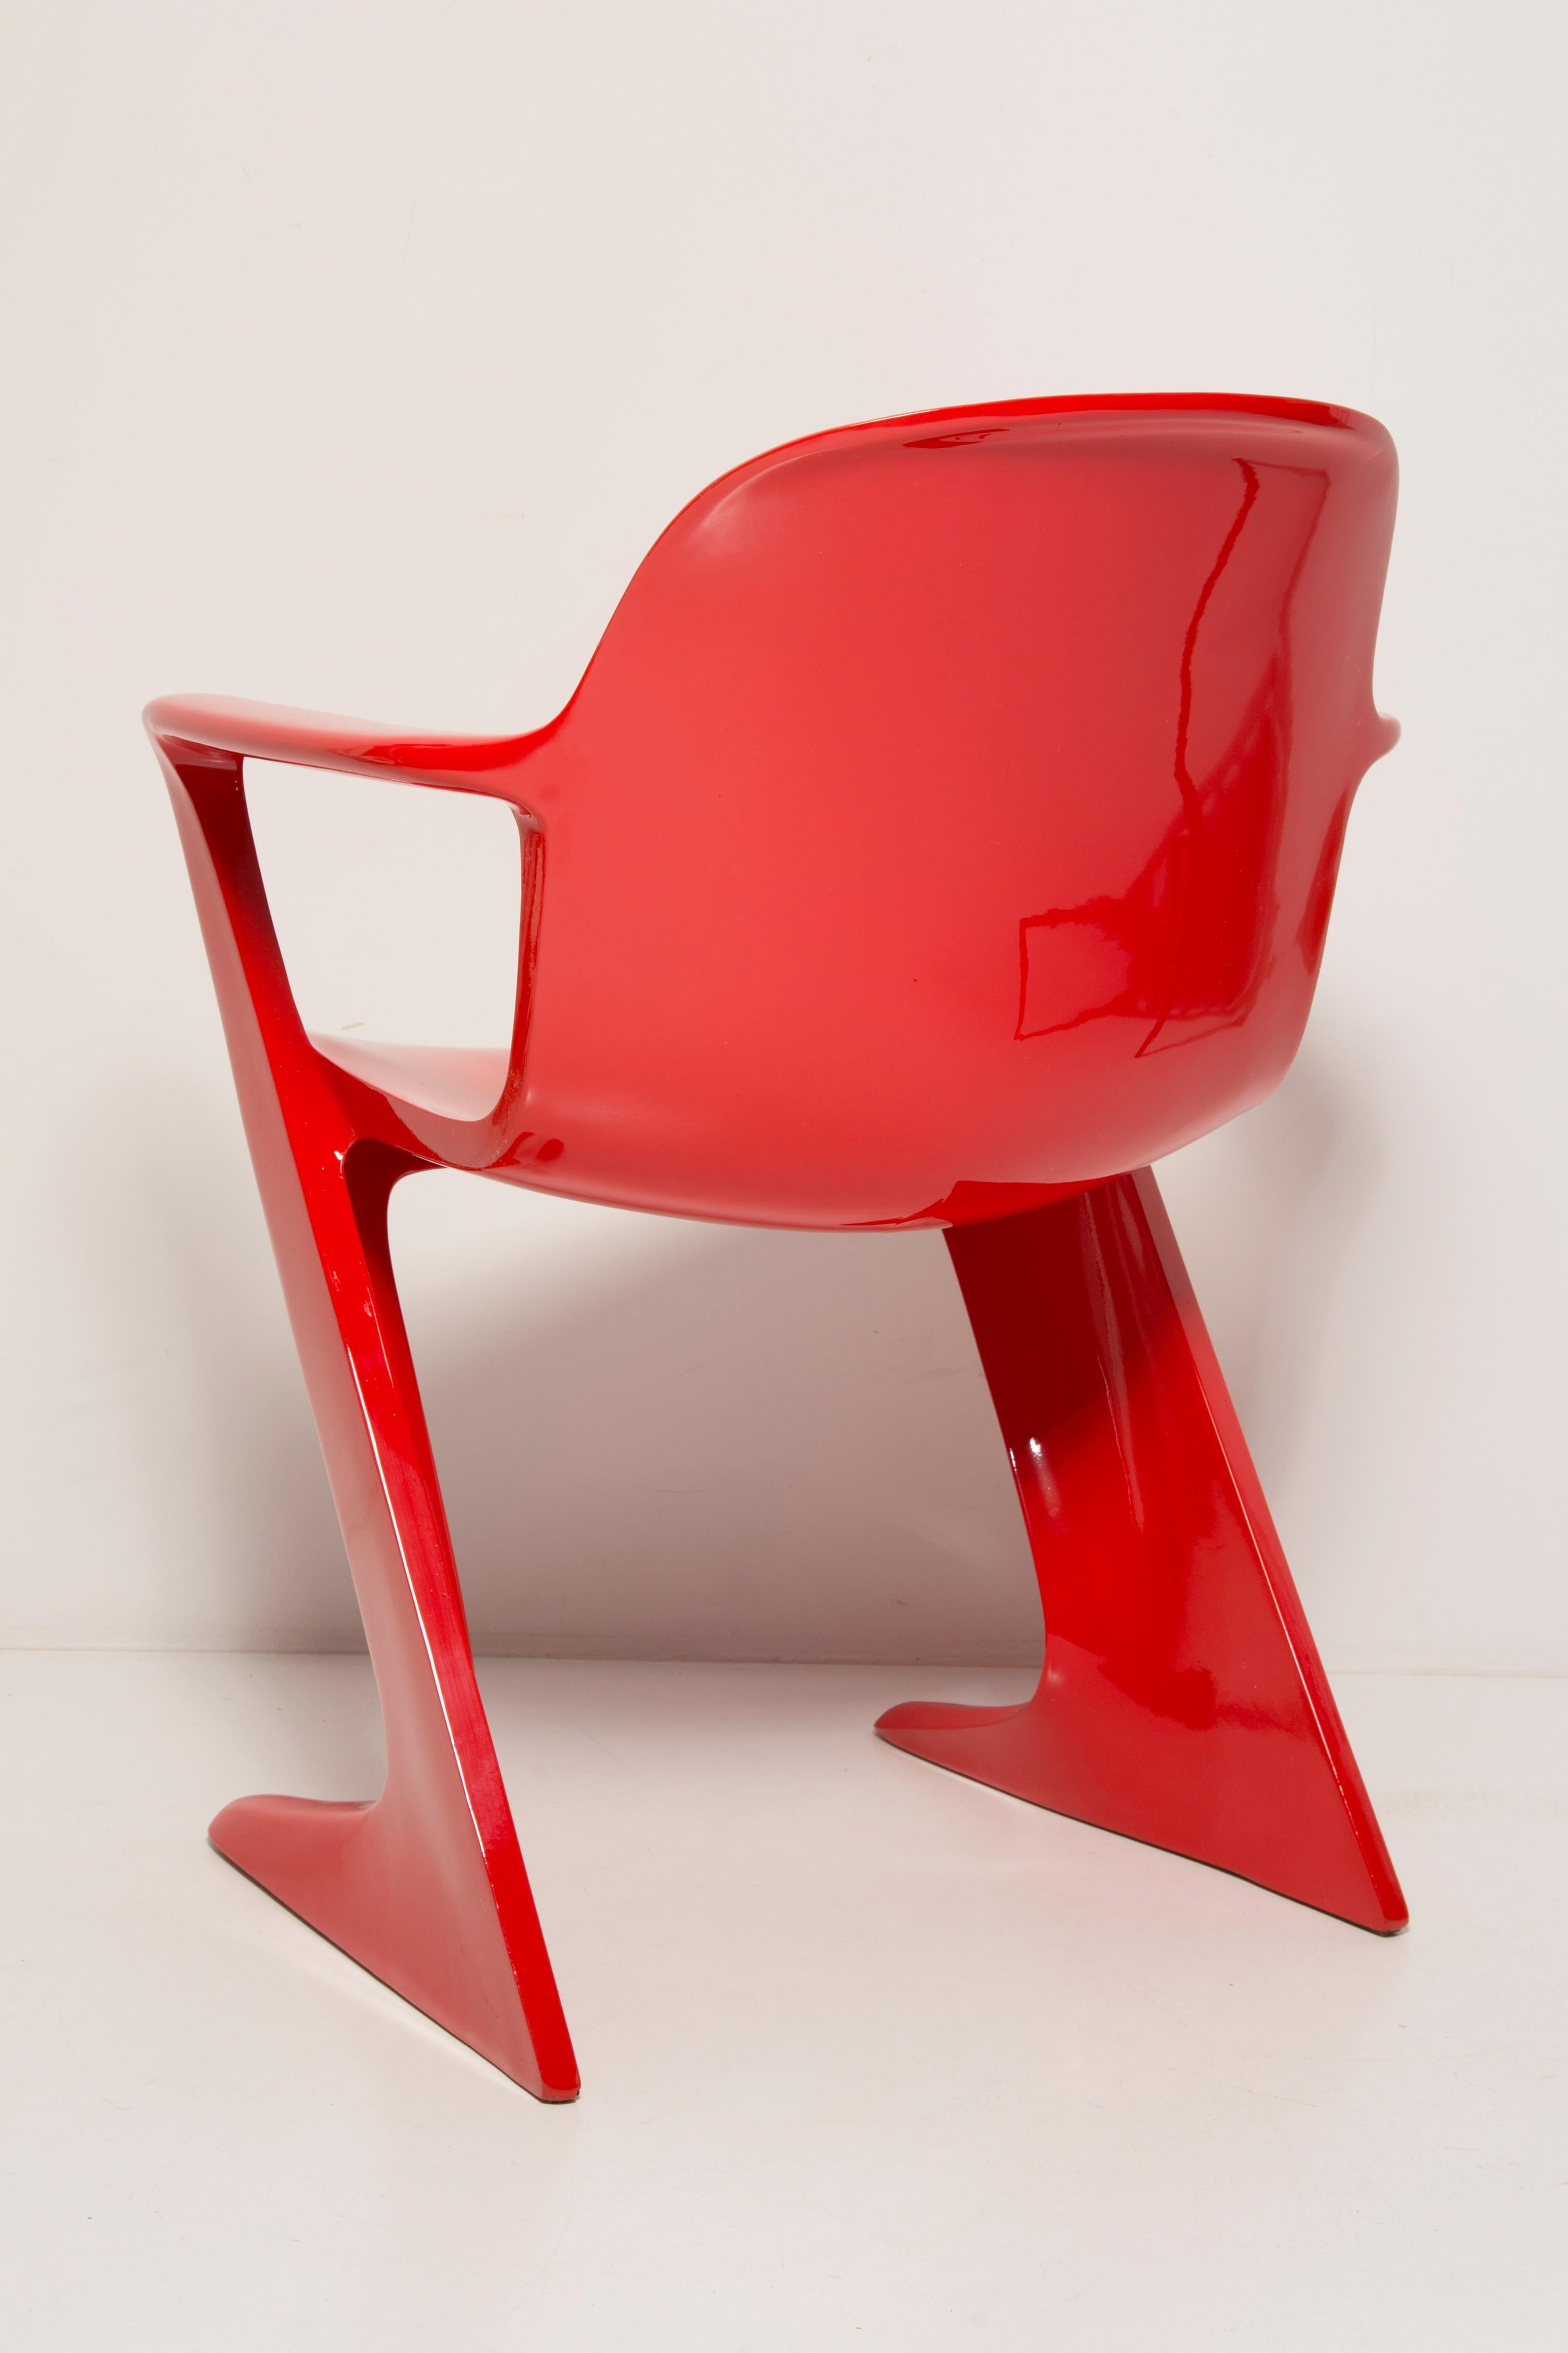 Set of Six Midcentury Signal Red Kangaroo Chairs, Ernst Moeckl, Germany, 1968 For Sale 2